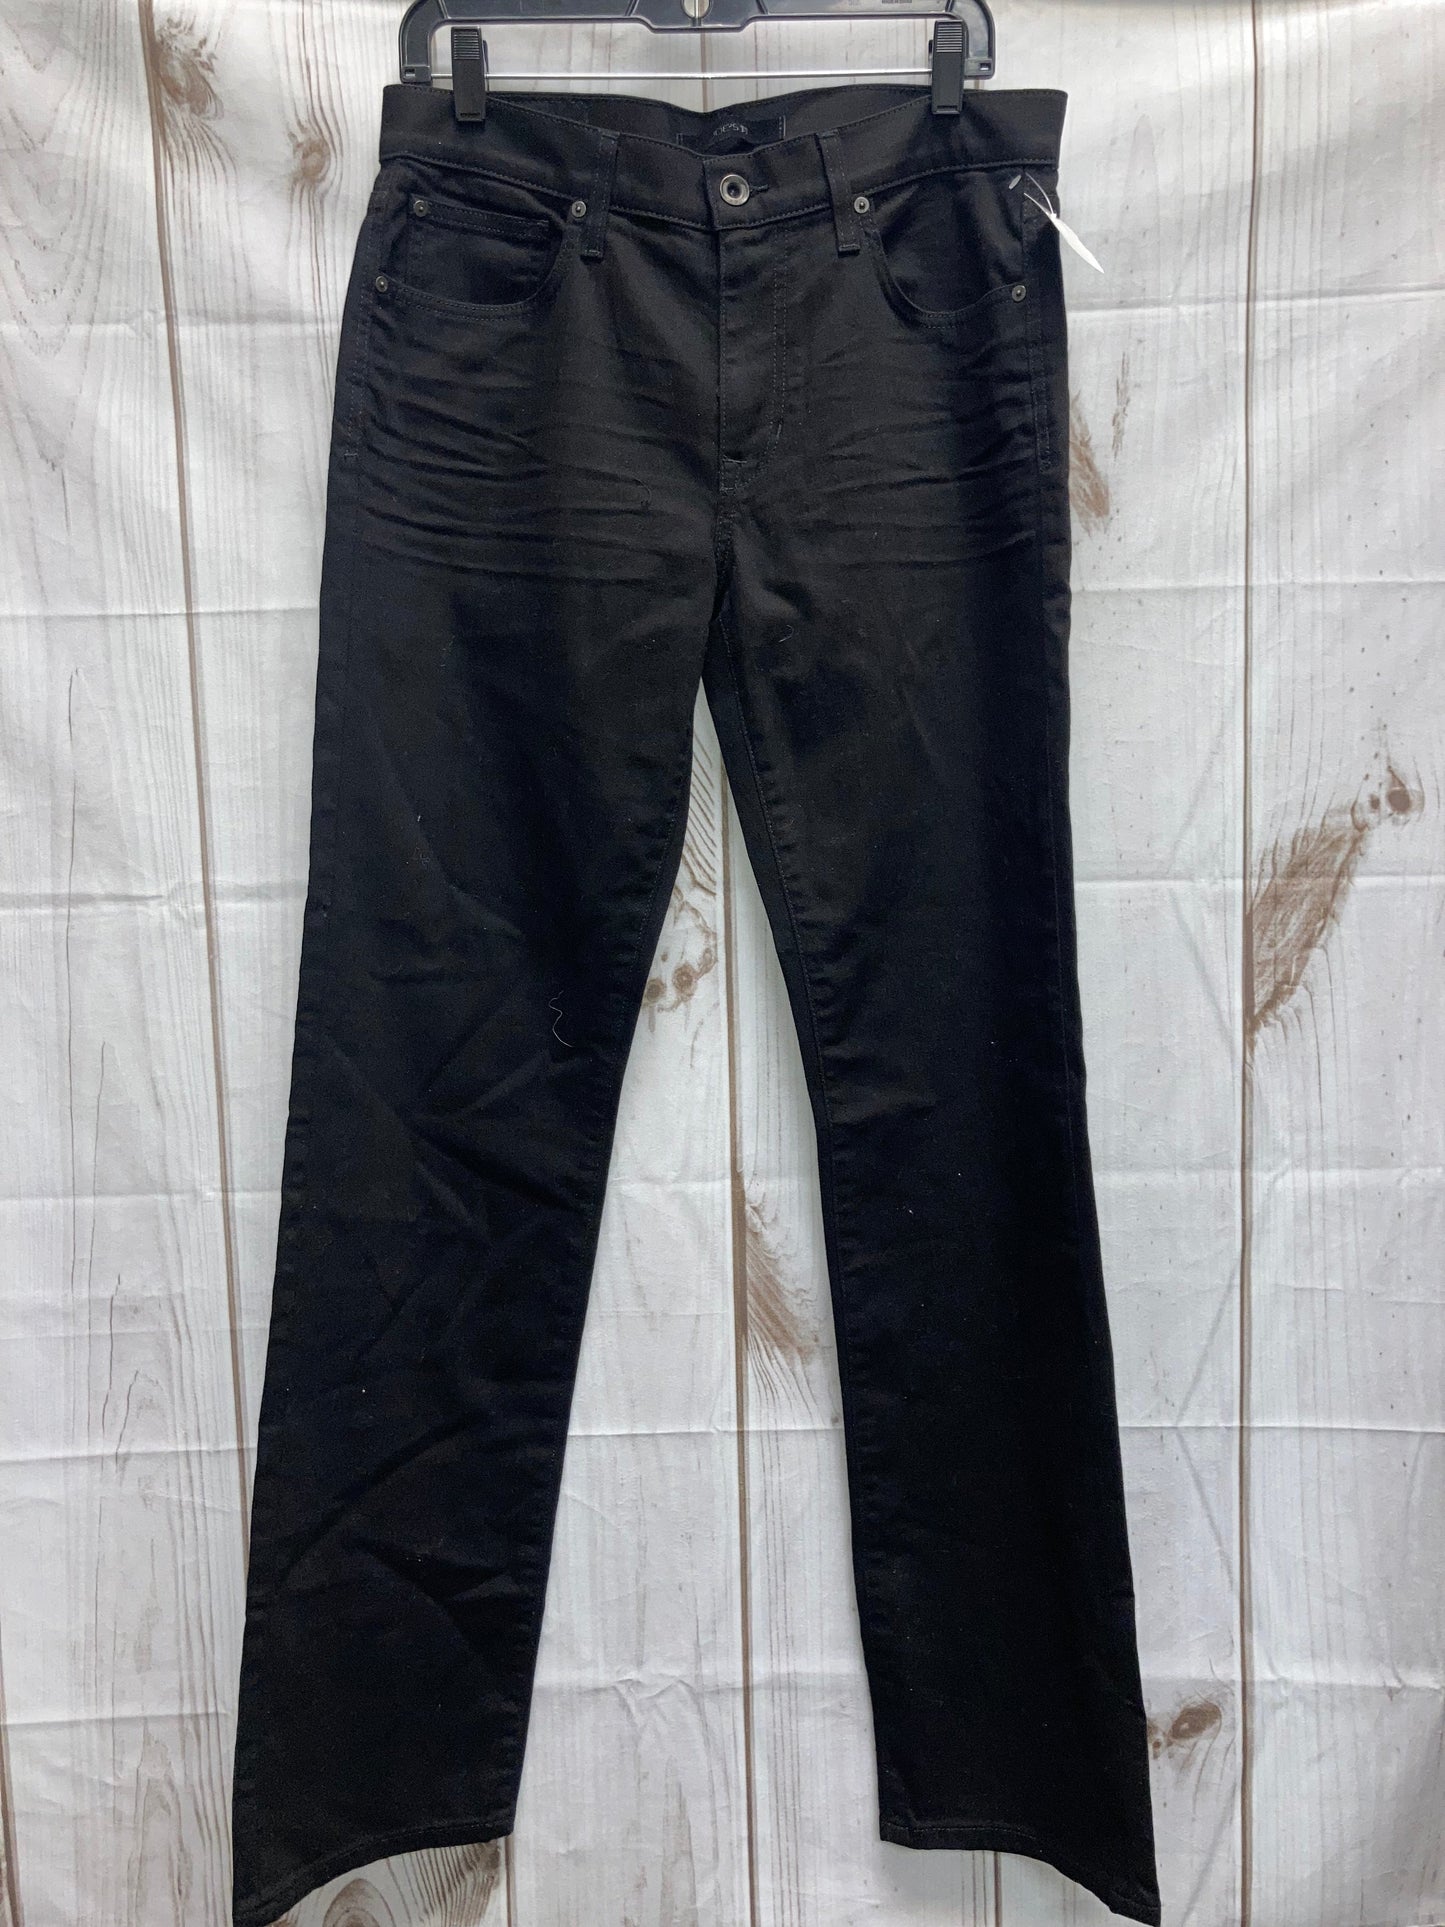 Pants Ankle By Joes Jeans  Size: 12